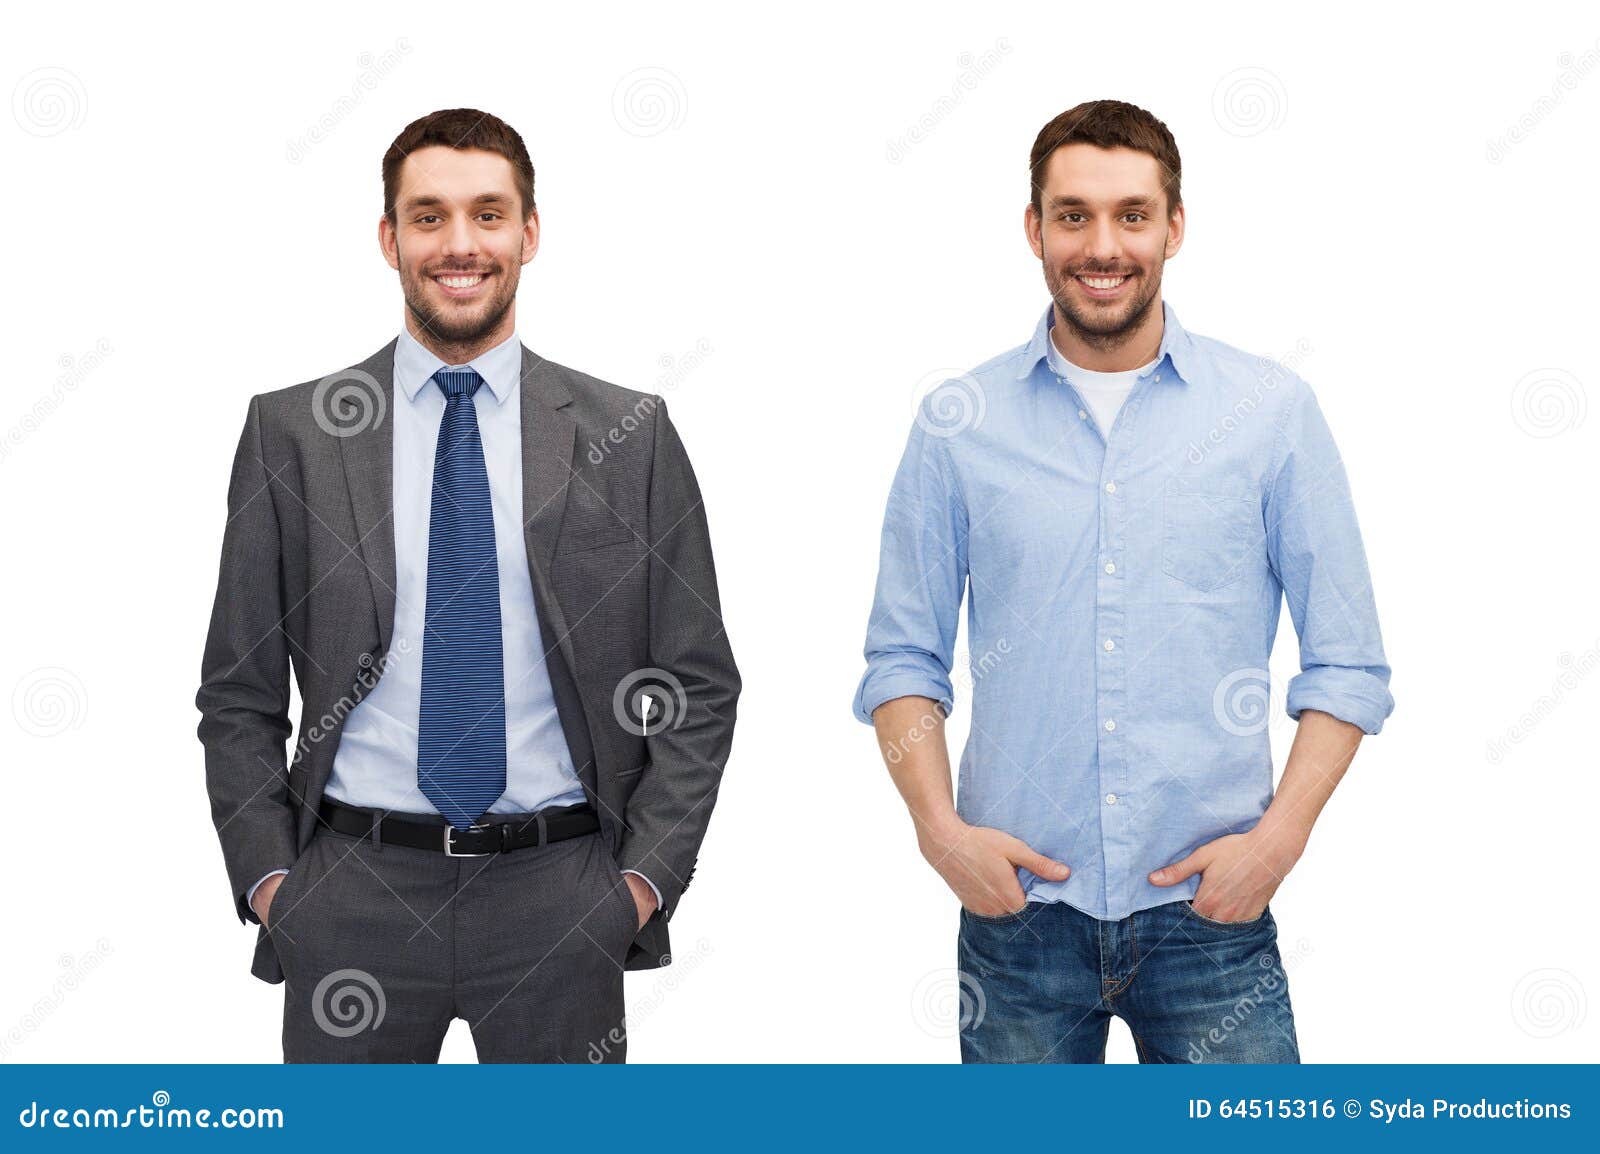 same man in different style clothes